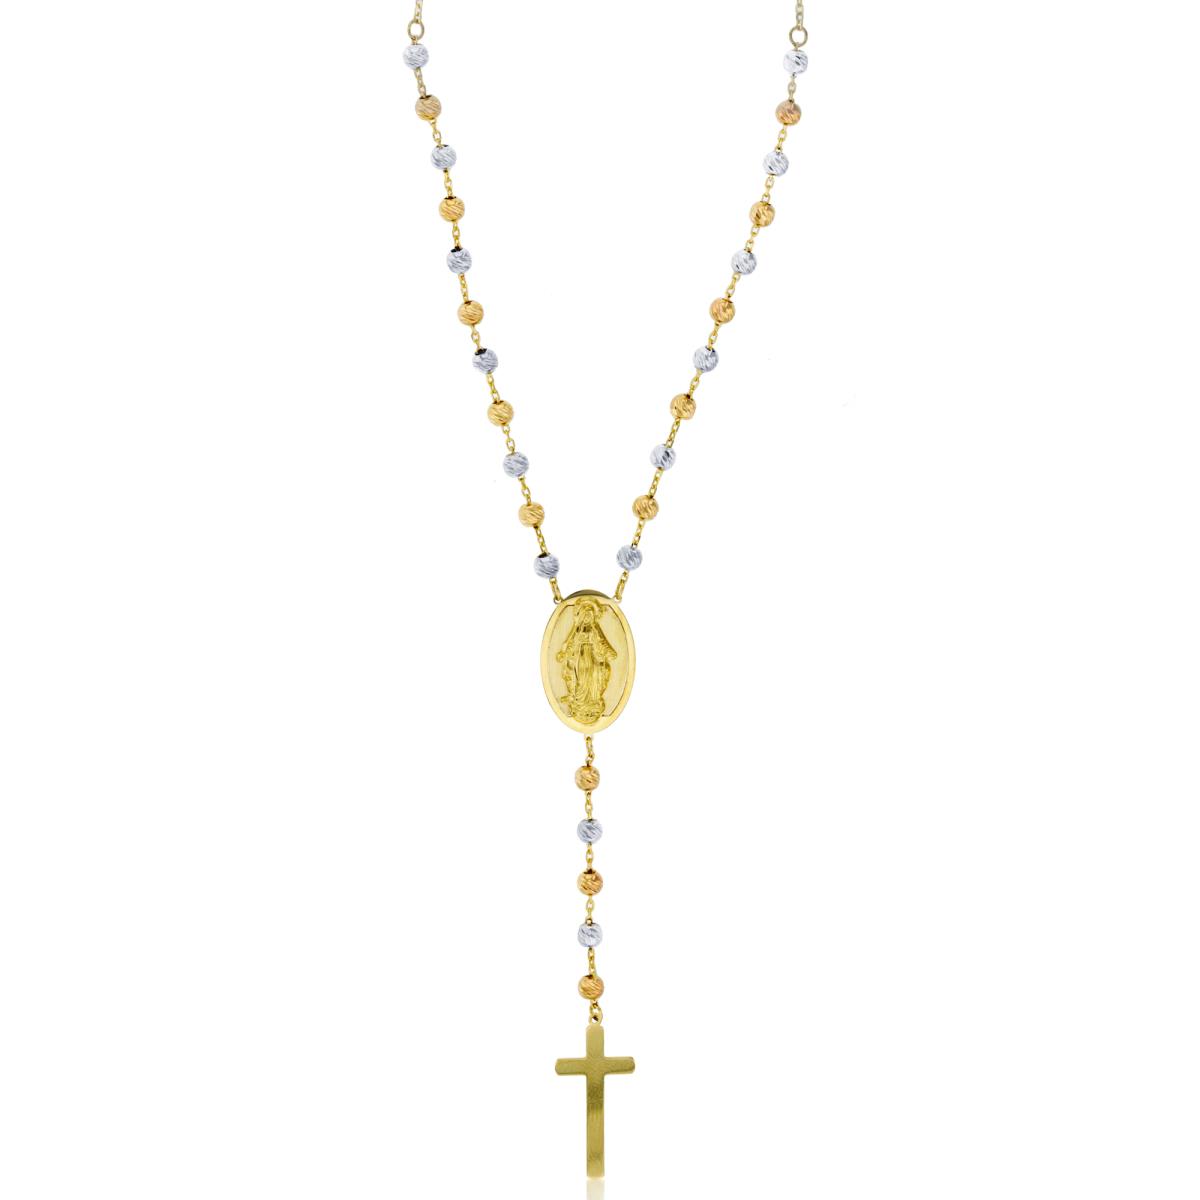 10K Two-Tone Gold 3mm DC Beads Virgin Mary & Cross Rosary 19"-20" Necklace